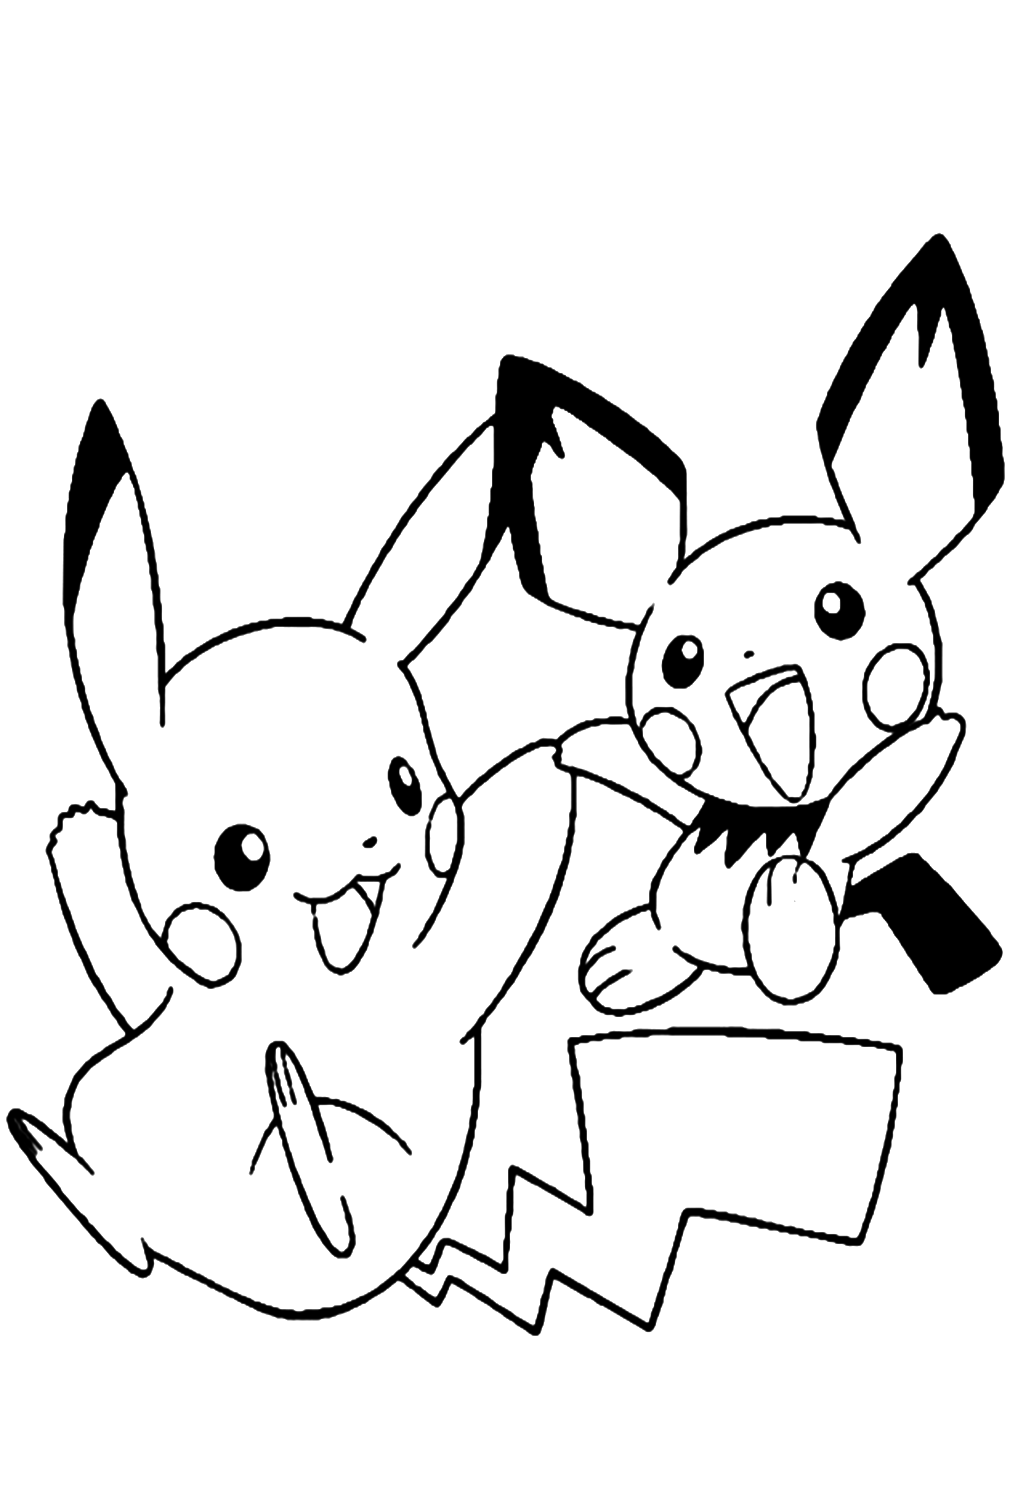 Pichu and Pikachu Coloring Pages